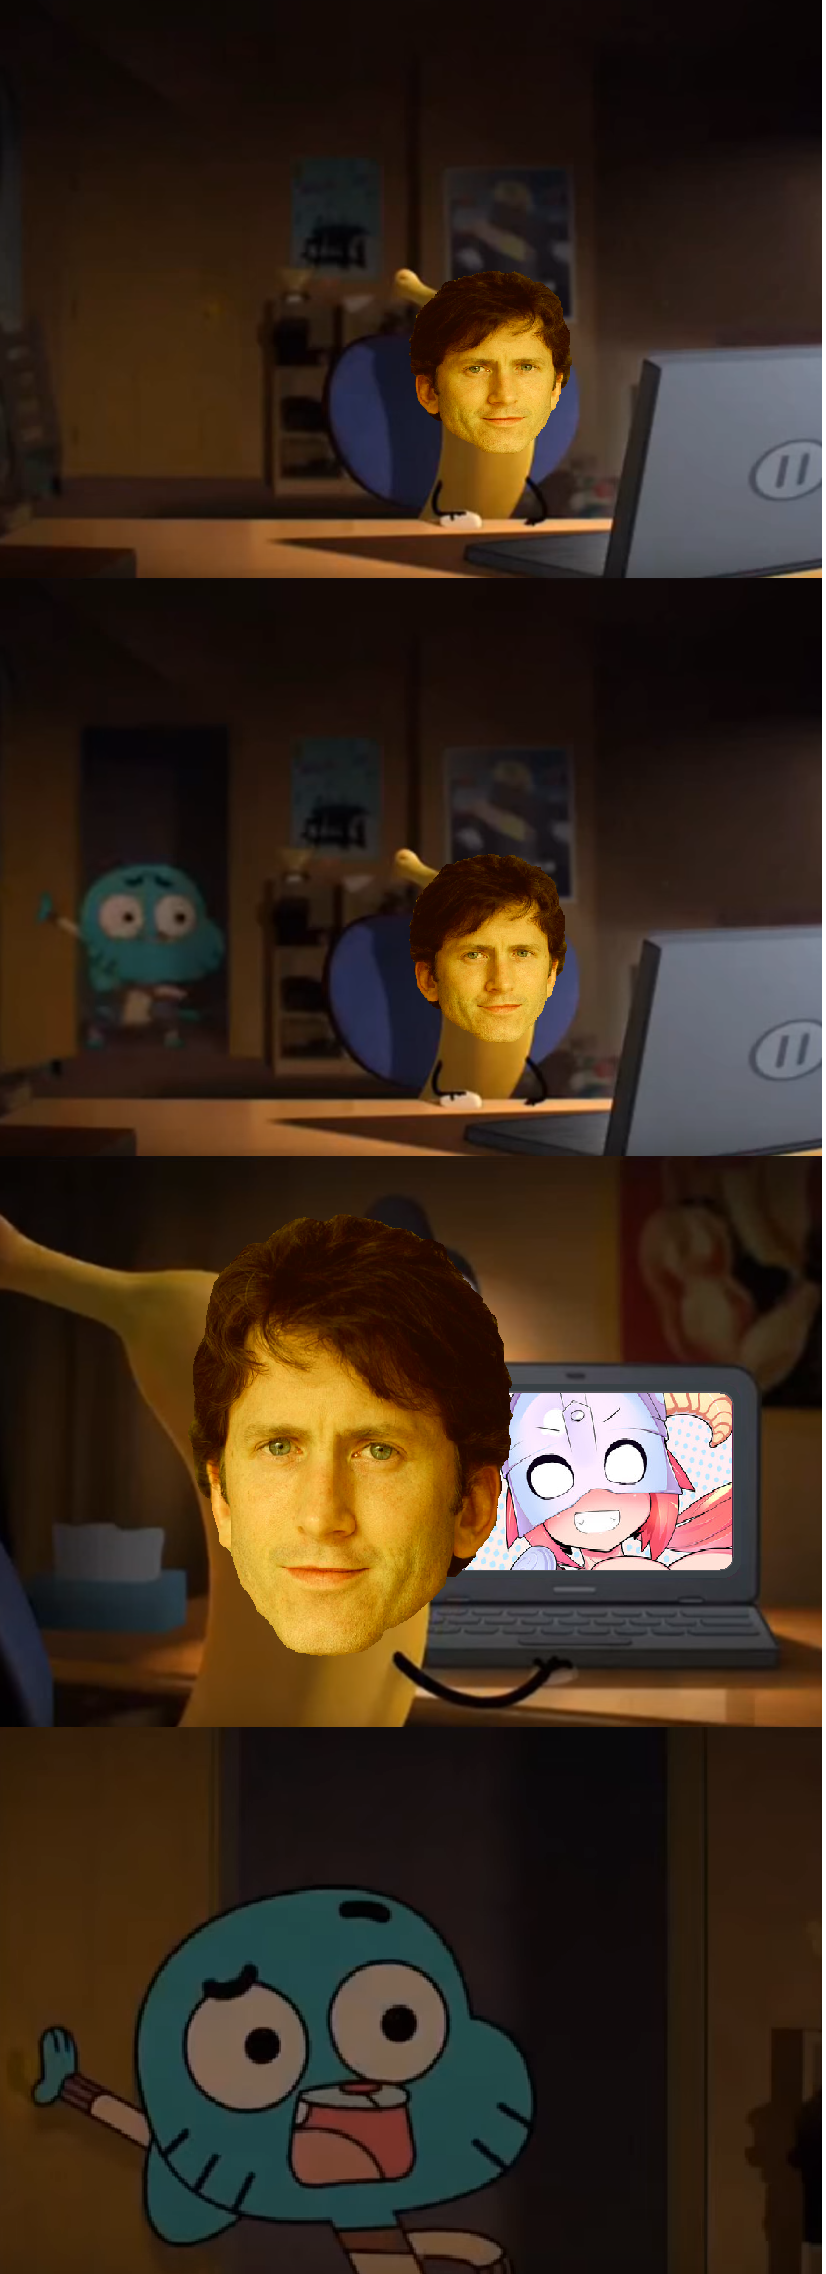 Neptune recommend best of this todd howard when dont skyrim